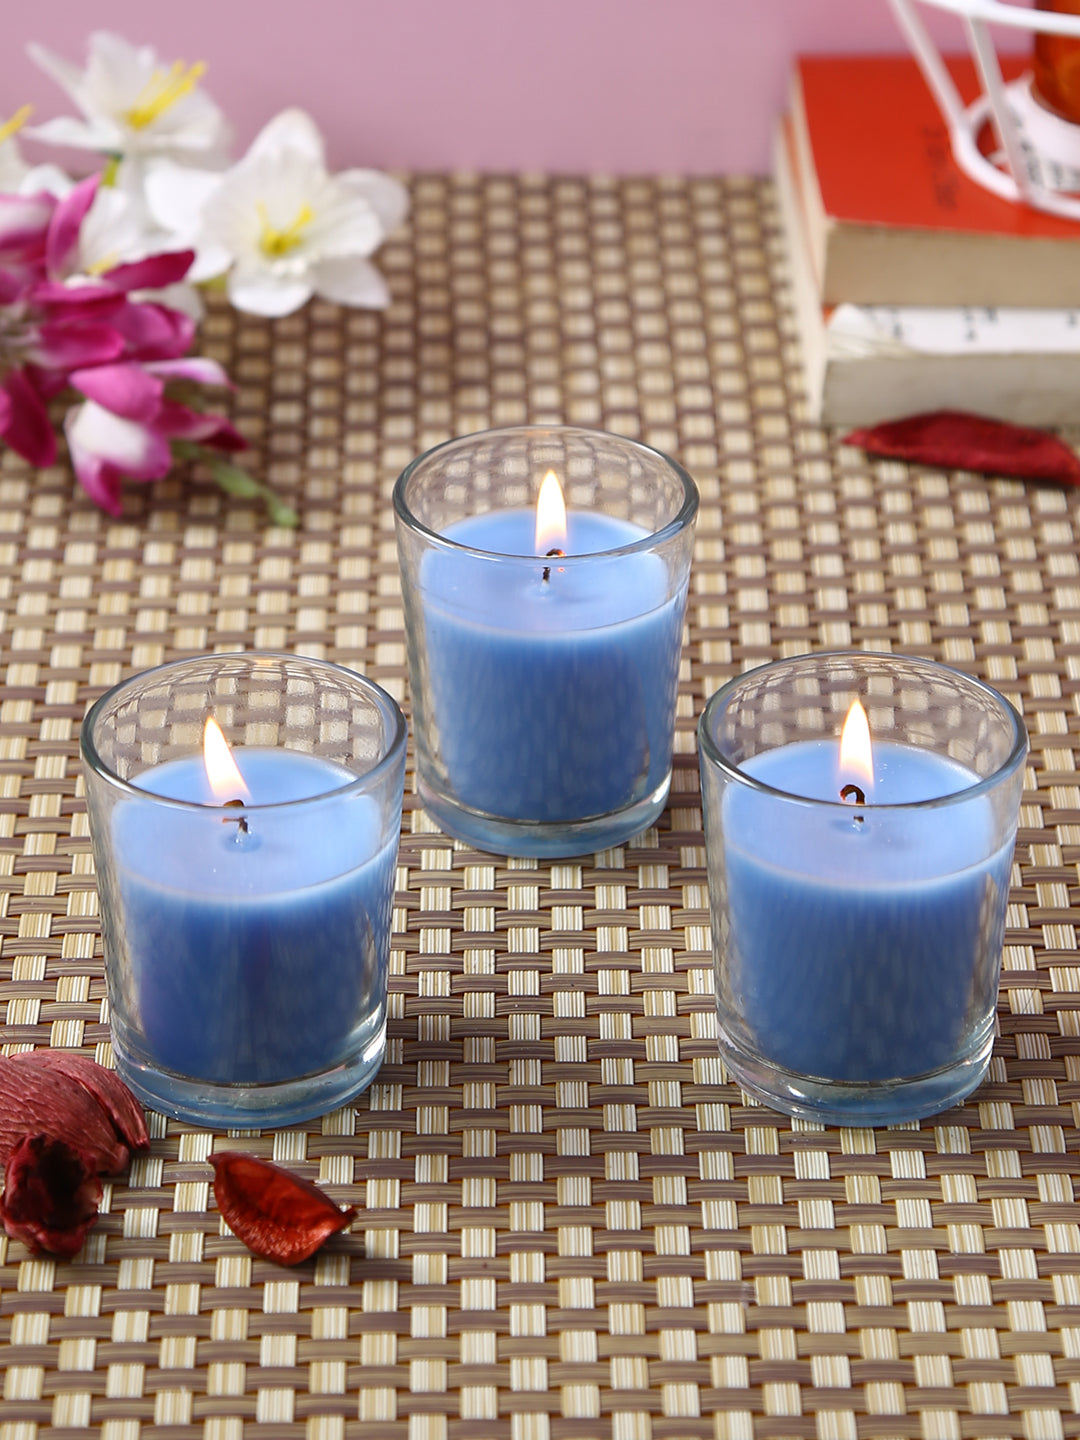 Set of 3 Hosley® Highly Fragranced Caribbean Breeze Filled Glass Candles, 1.6 Oz wax each